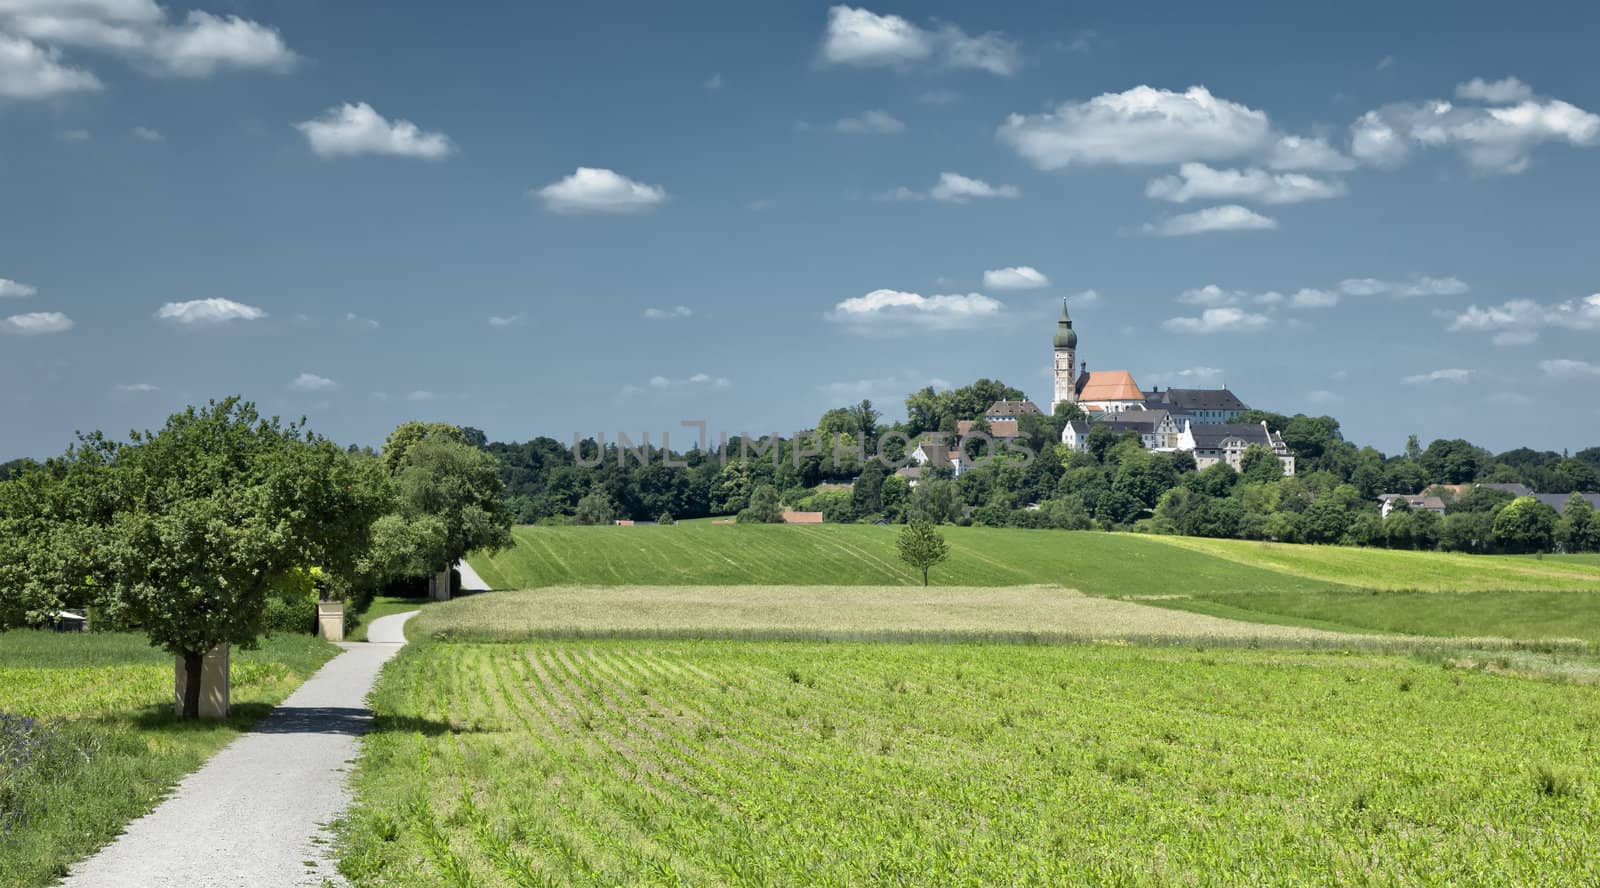 An image of the beautiful monastery Andechs in Bavaria Germany